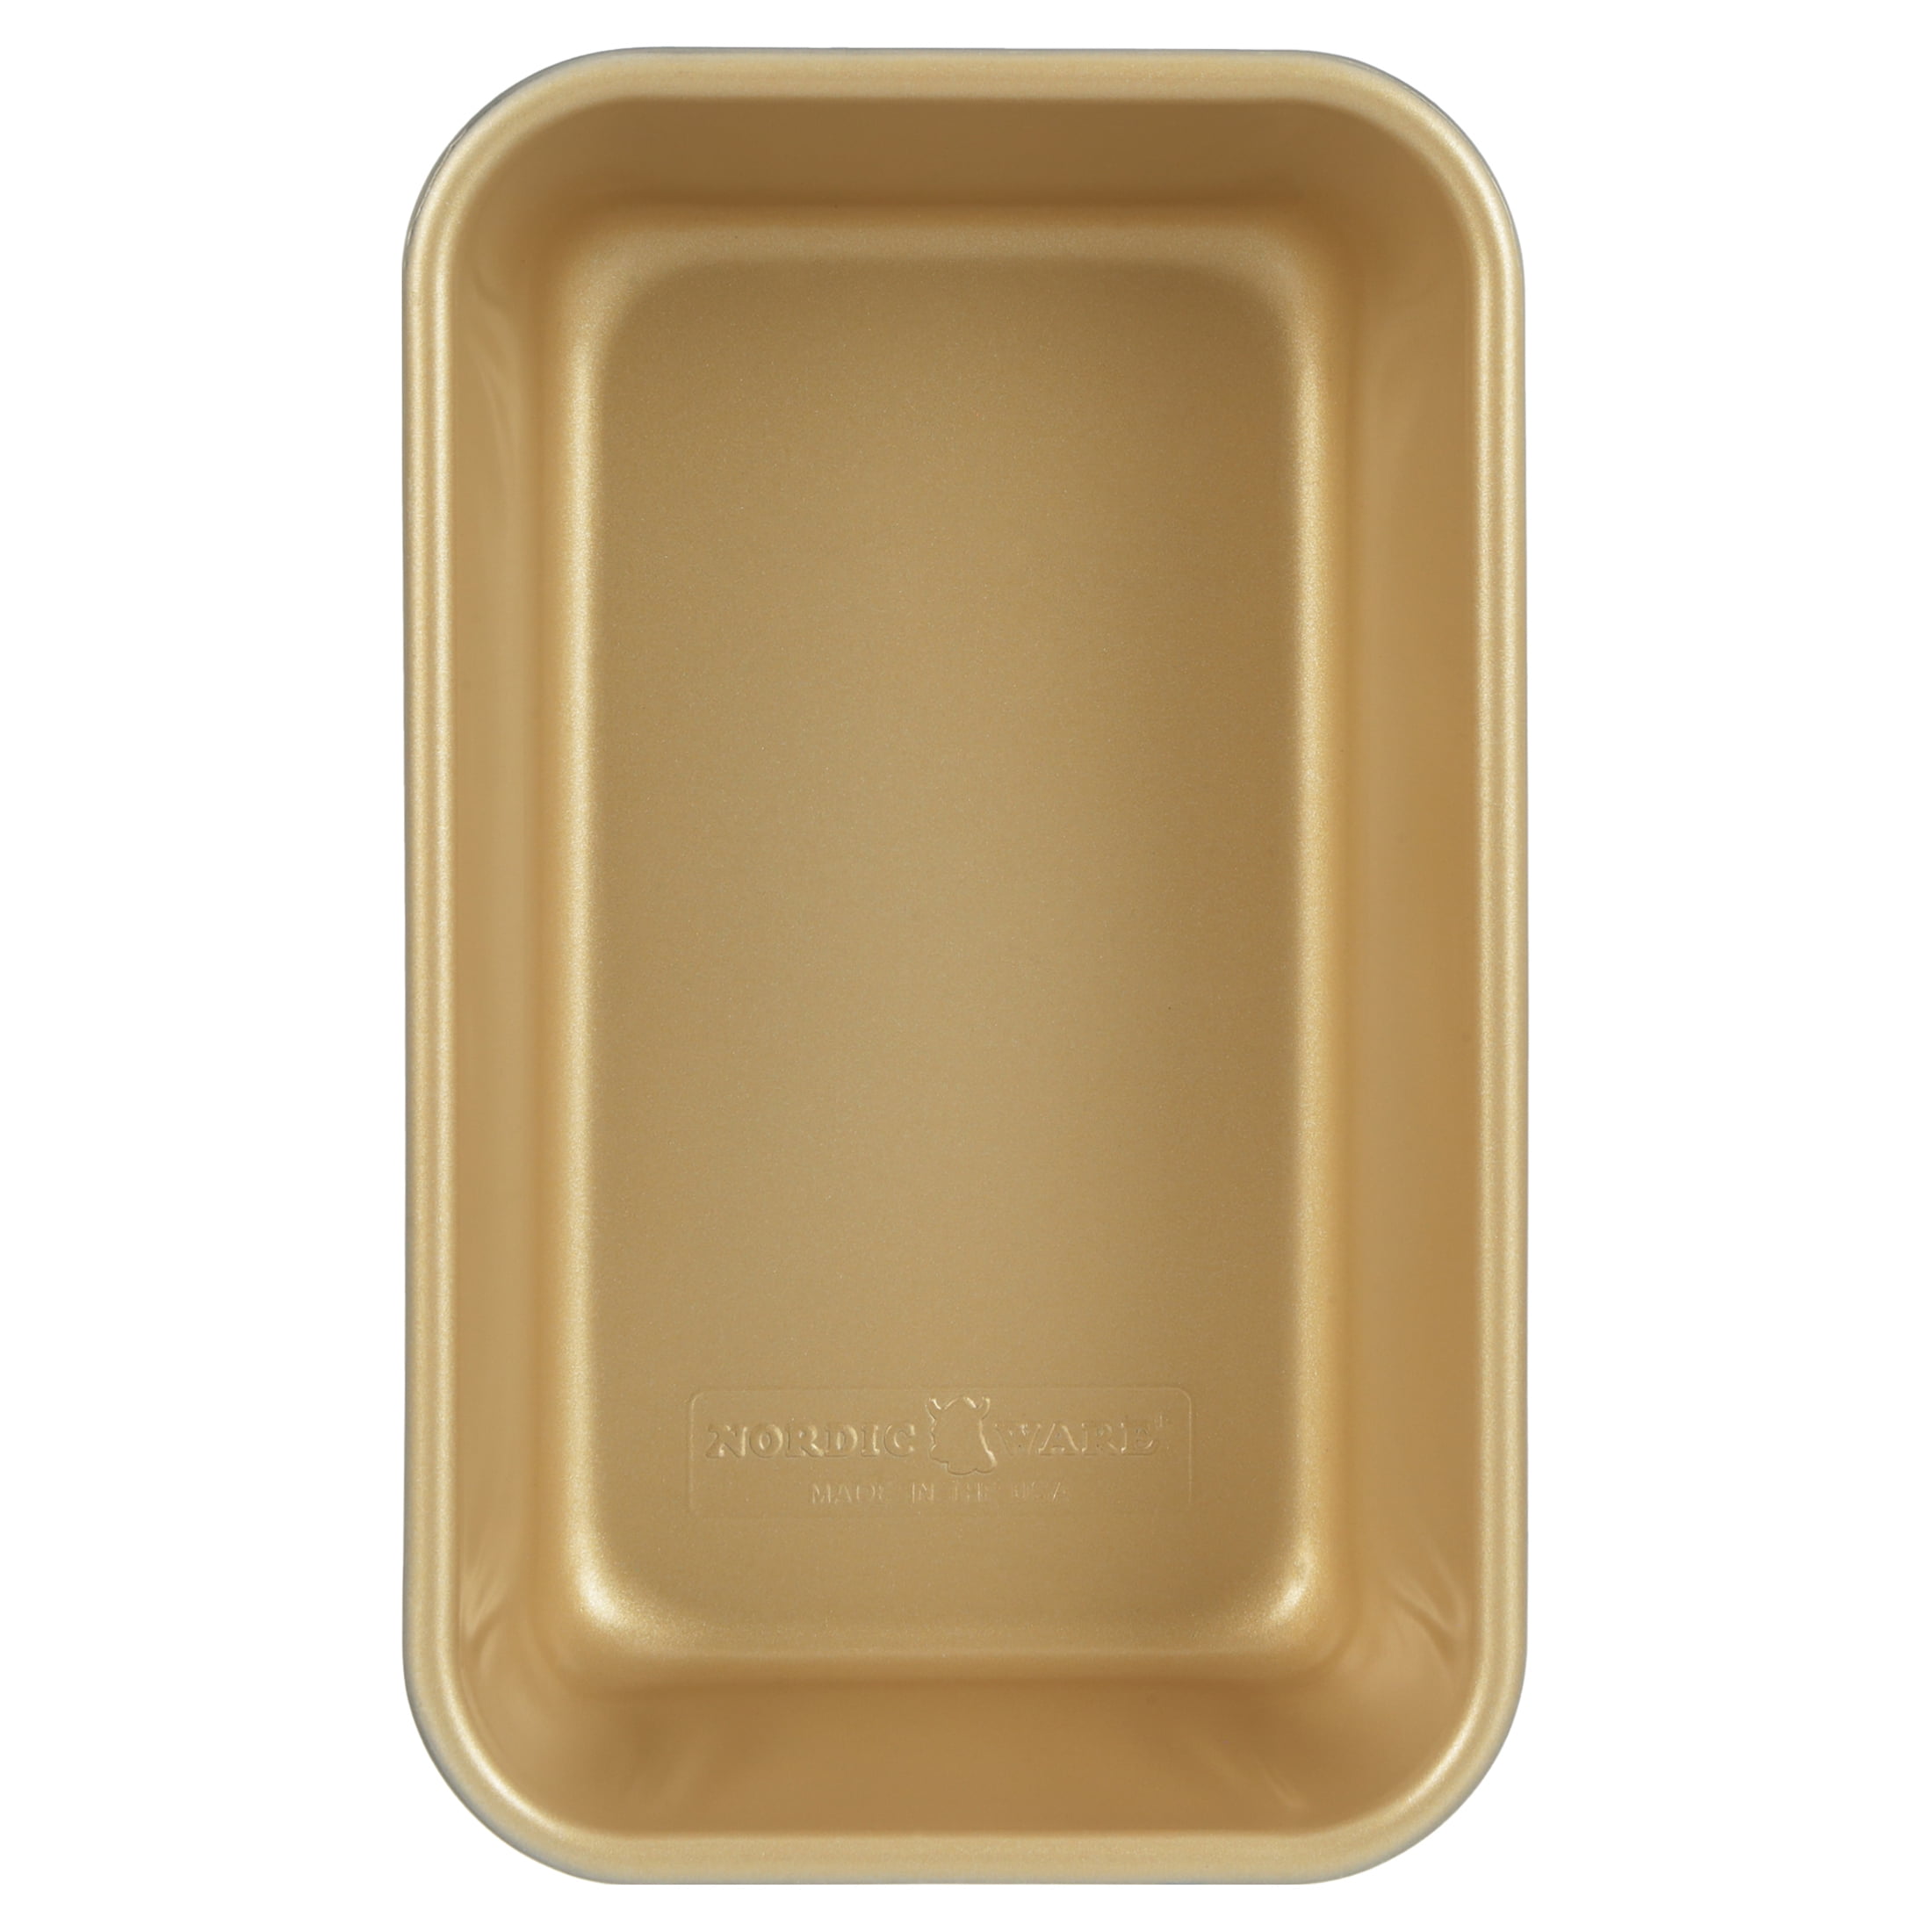 Nordic Ware Nordic Ware-45900-Loaf, 1-1/2 Pound, Natural Aluminum  Commercial Loaf Pan, Silver